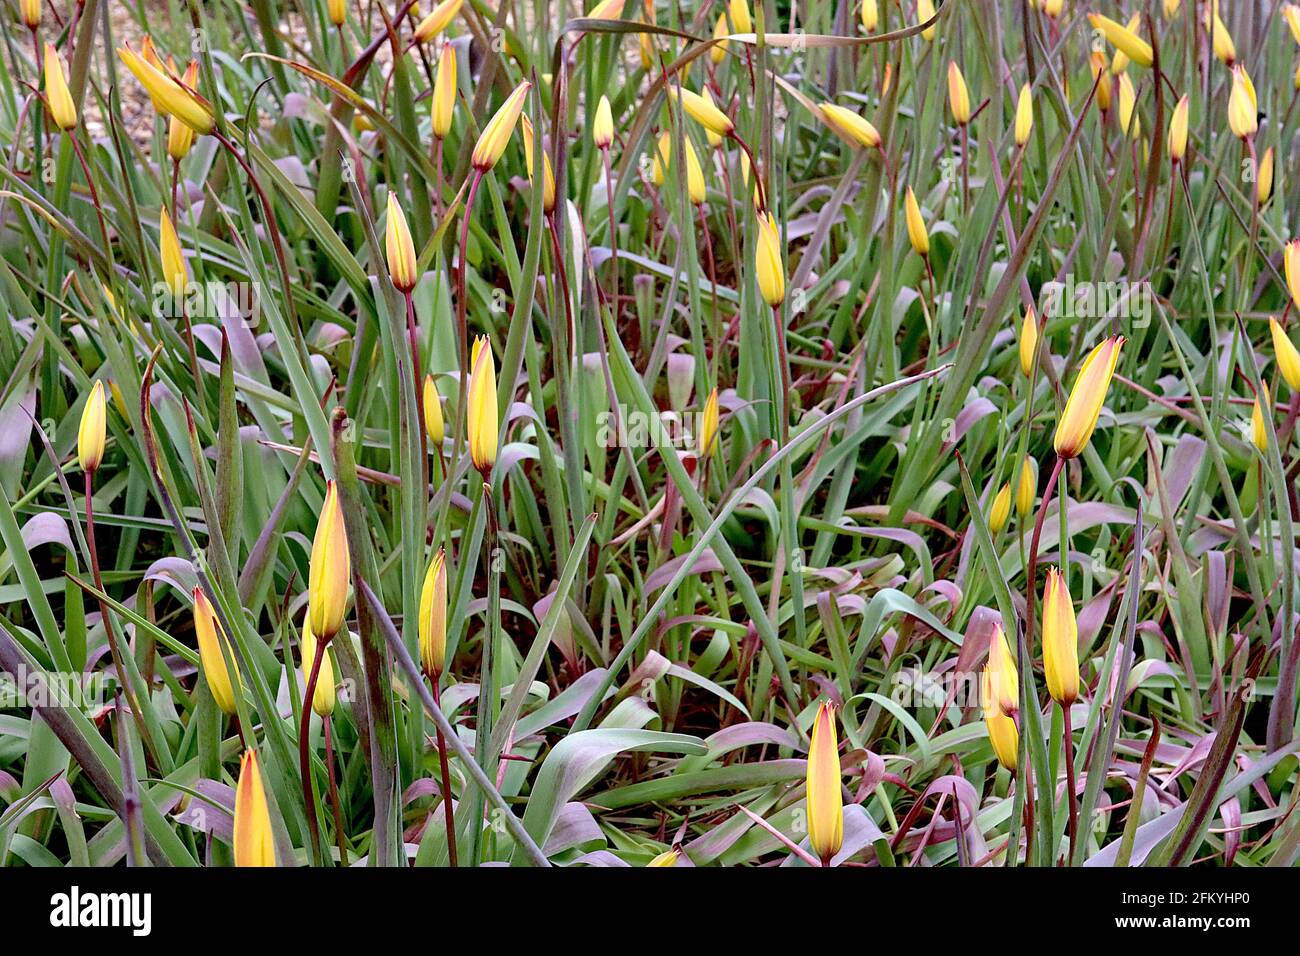 Tulipa sylvestris subsp australis Species tulip 15 wild tulip – closed narrow yellow flowers with red tinges,  May, England, UK Stock Photo